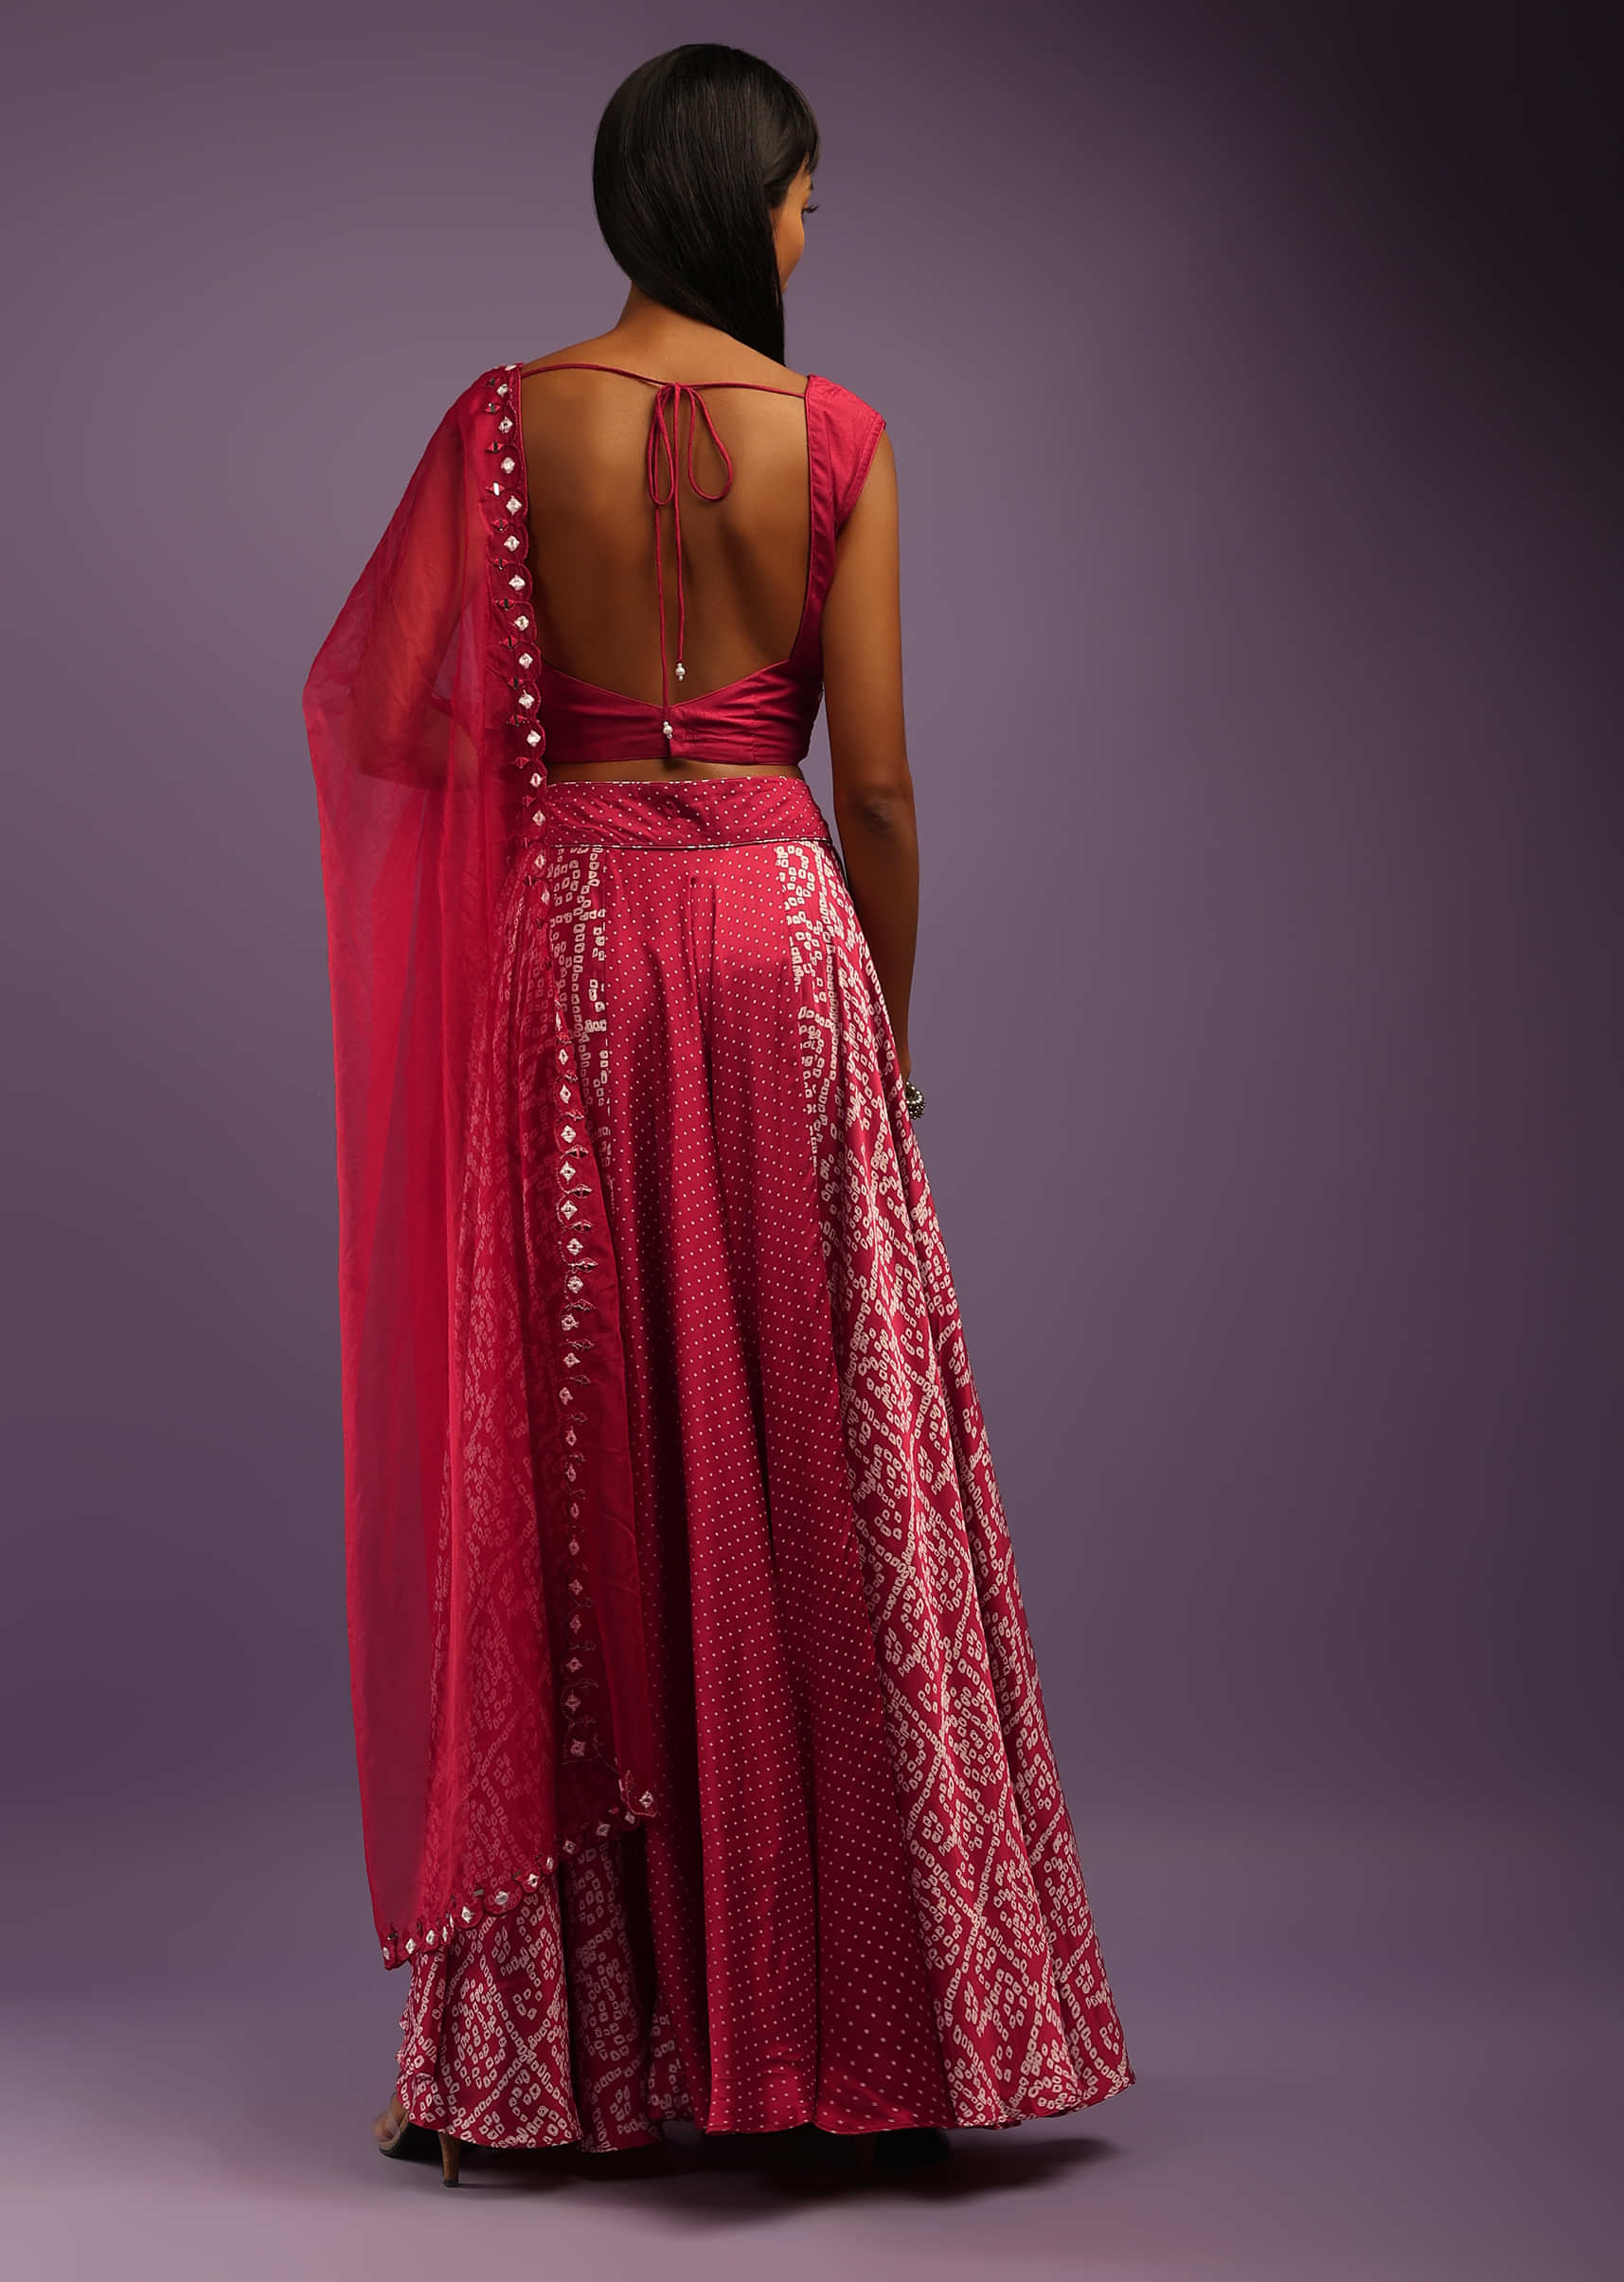 Garnet Red Skirt In Satin Blend With Bandhani Print And Abla Embroidered Crop Top 